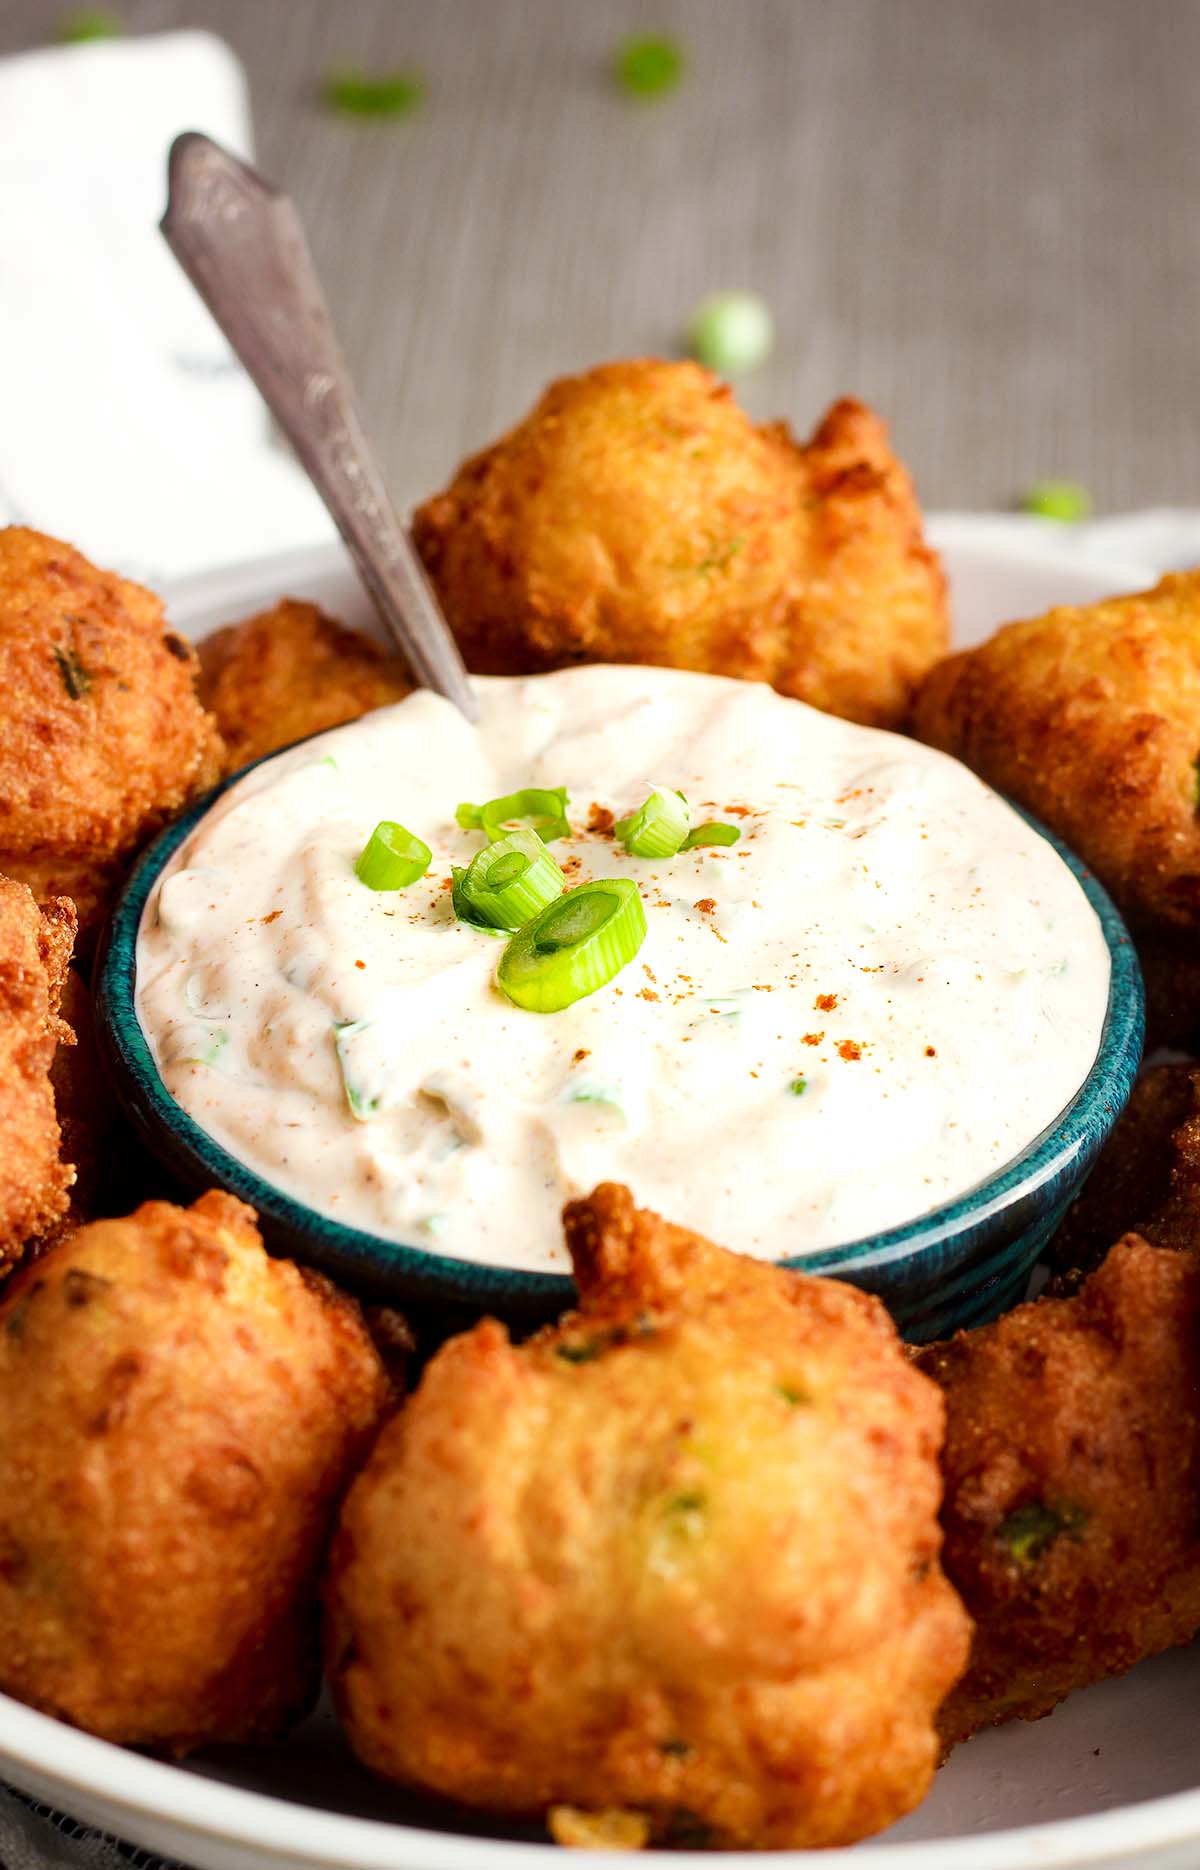 Bowl of Cajun mayo sauce topped with scallions surrounded by hush puppies